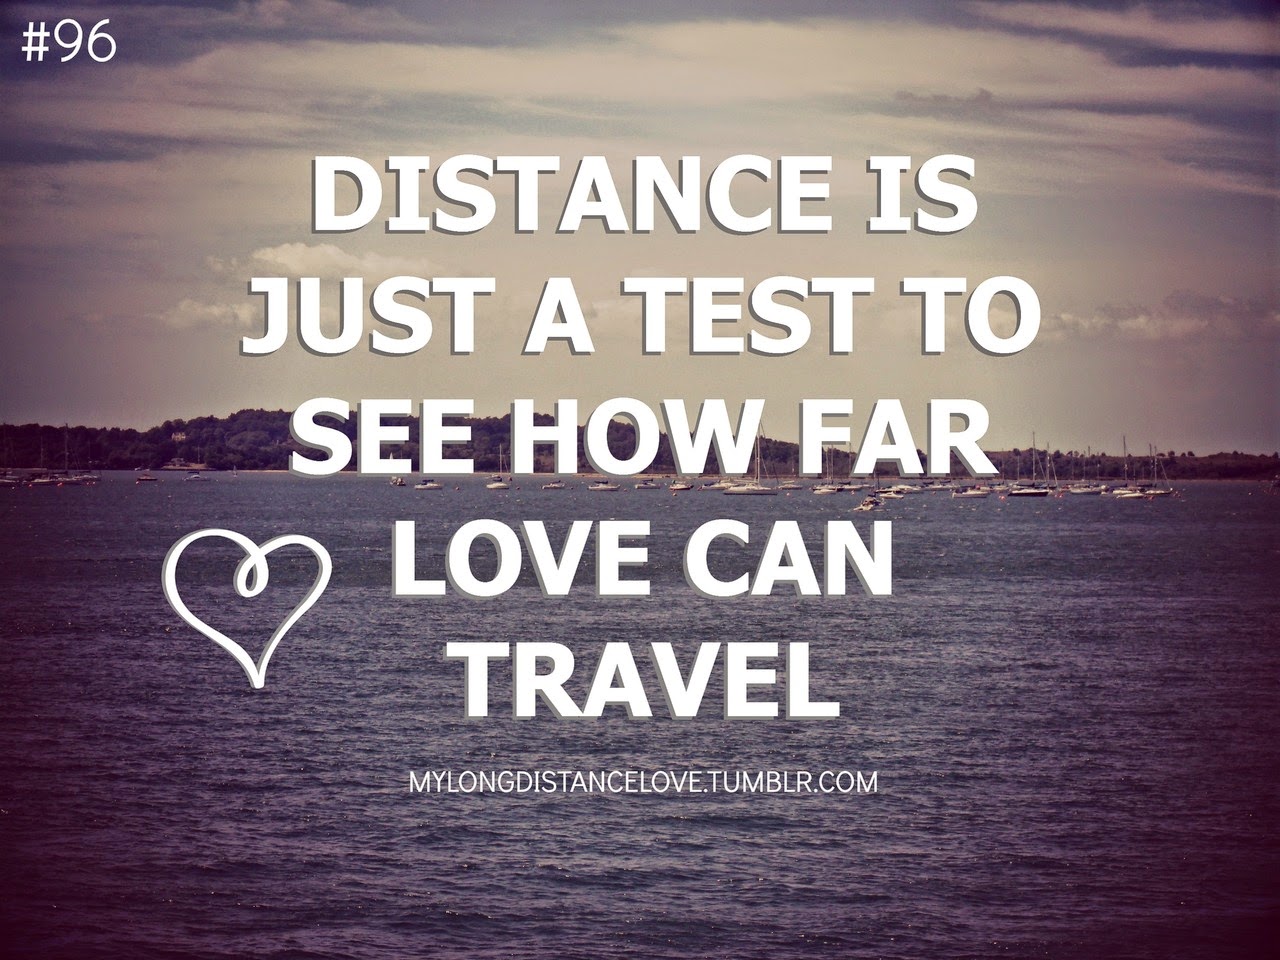 Inspirational Love Quotes For Long Distance Relationships Distance Relationship Quotes For Her And For Him